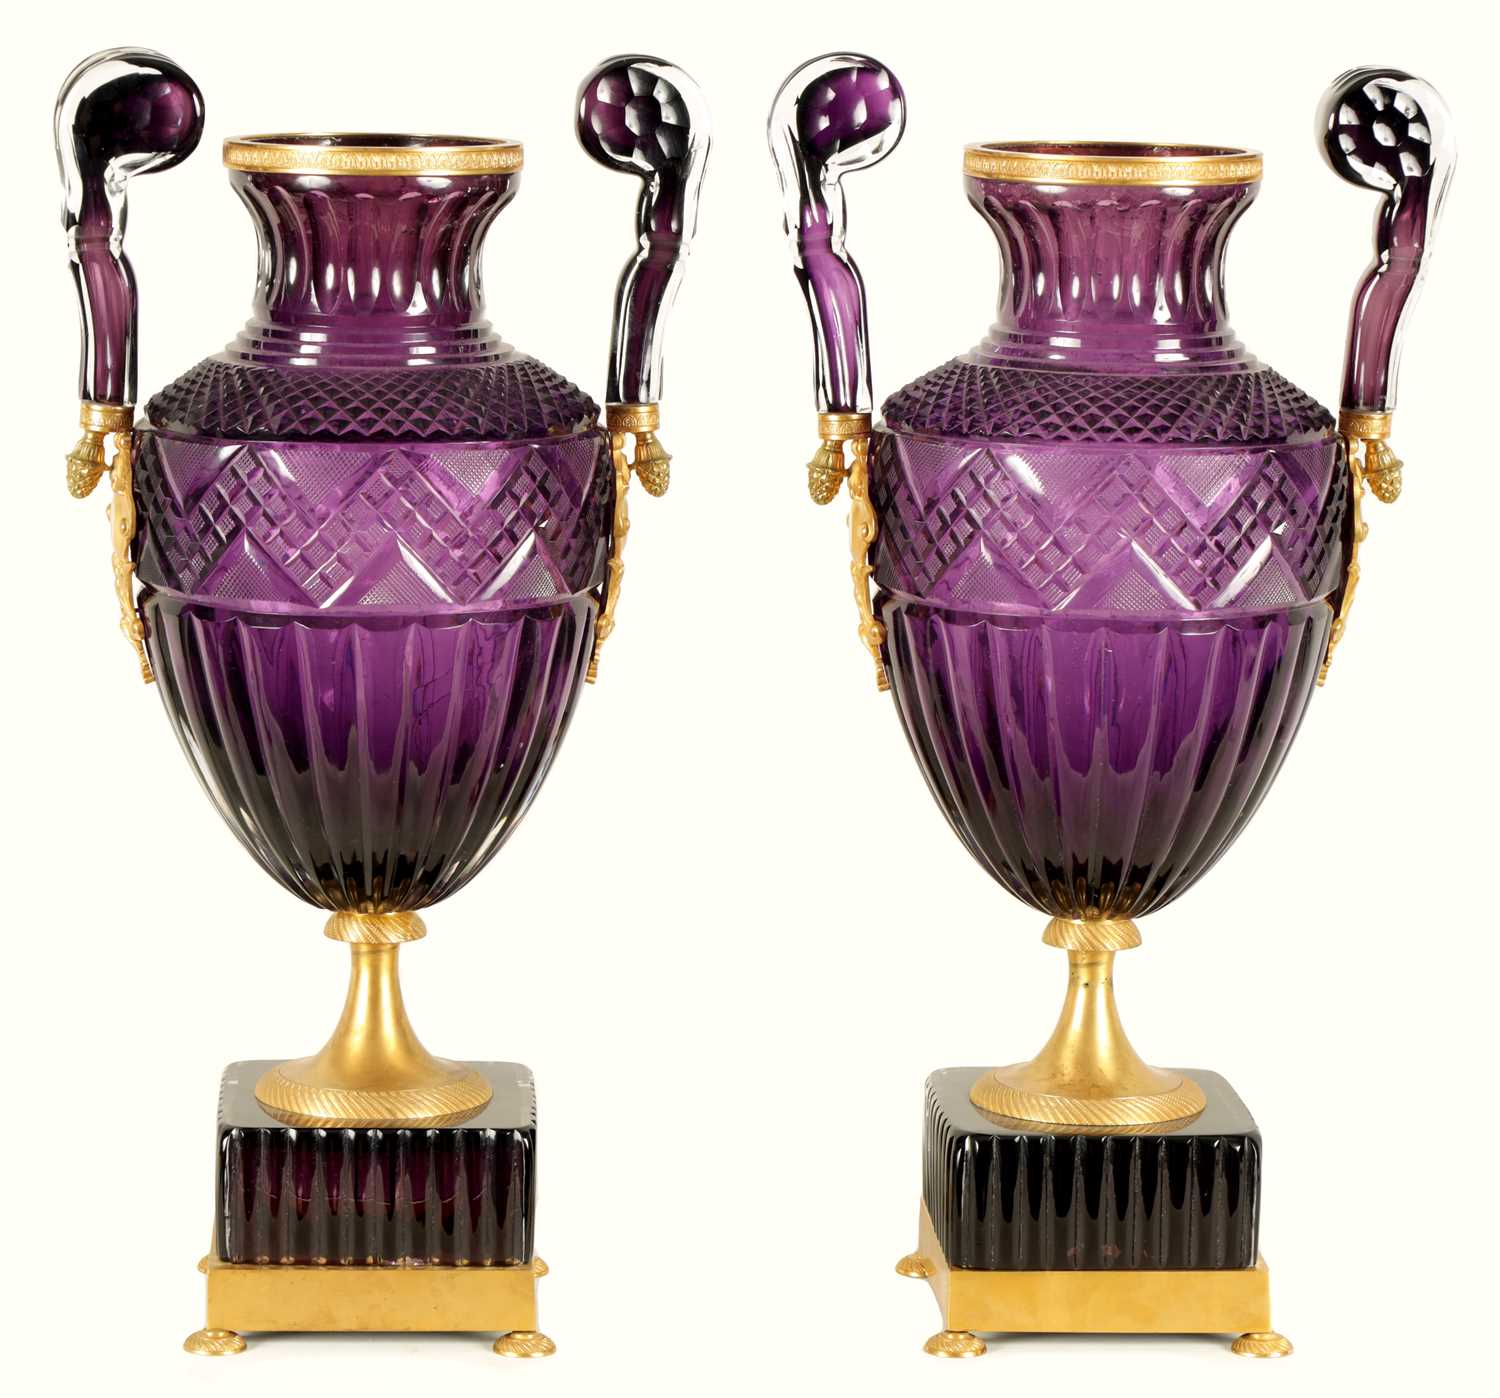 A LARGE PAIR OF LATE 19TH/EARLY 20TH CENTURY RUSSIAN ORMOLU MOUNTED AMETHYST CUT-GLASS - Image 4 of 14